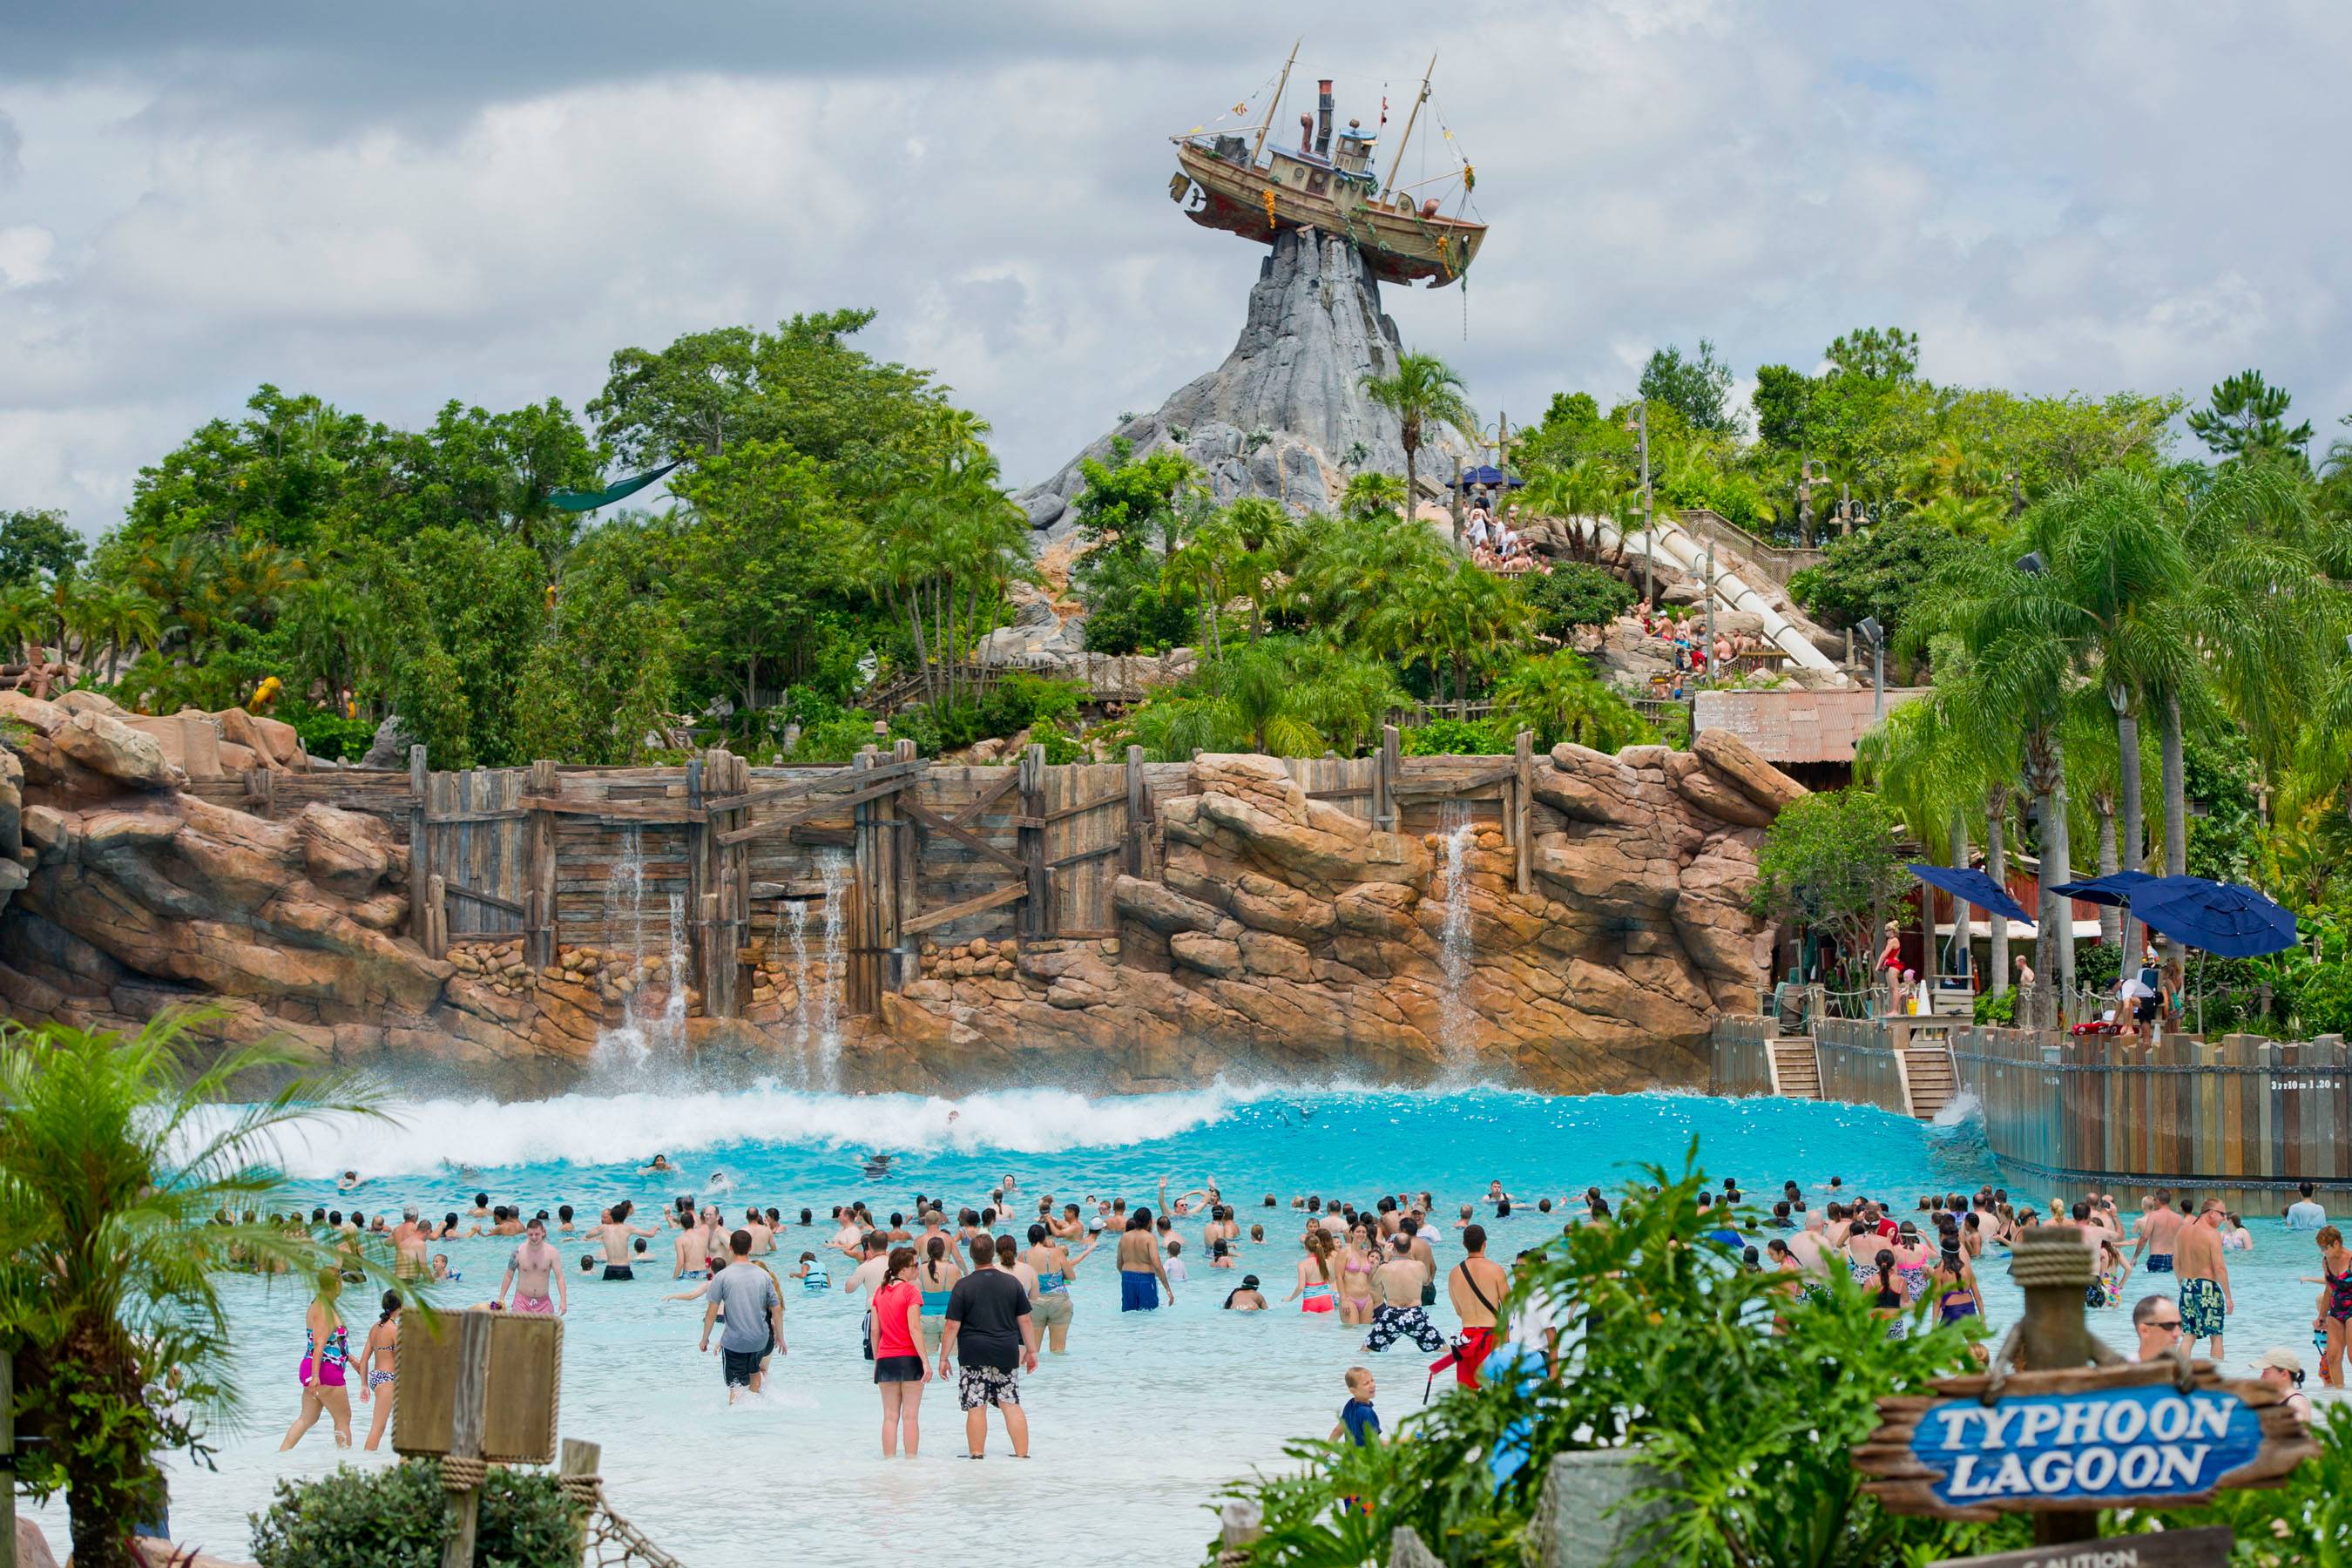 Typhoon Lagoon offering a limited-time Adults-Only area next week